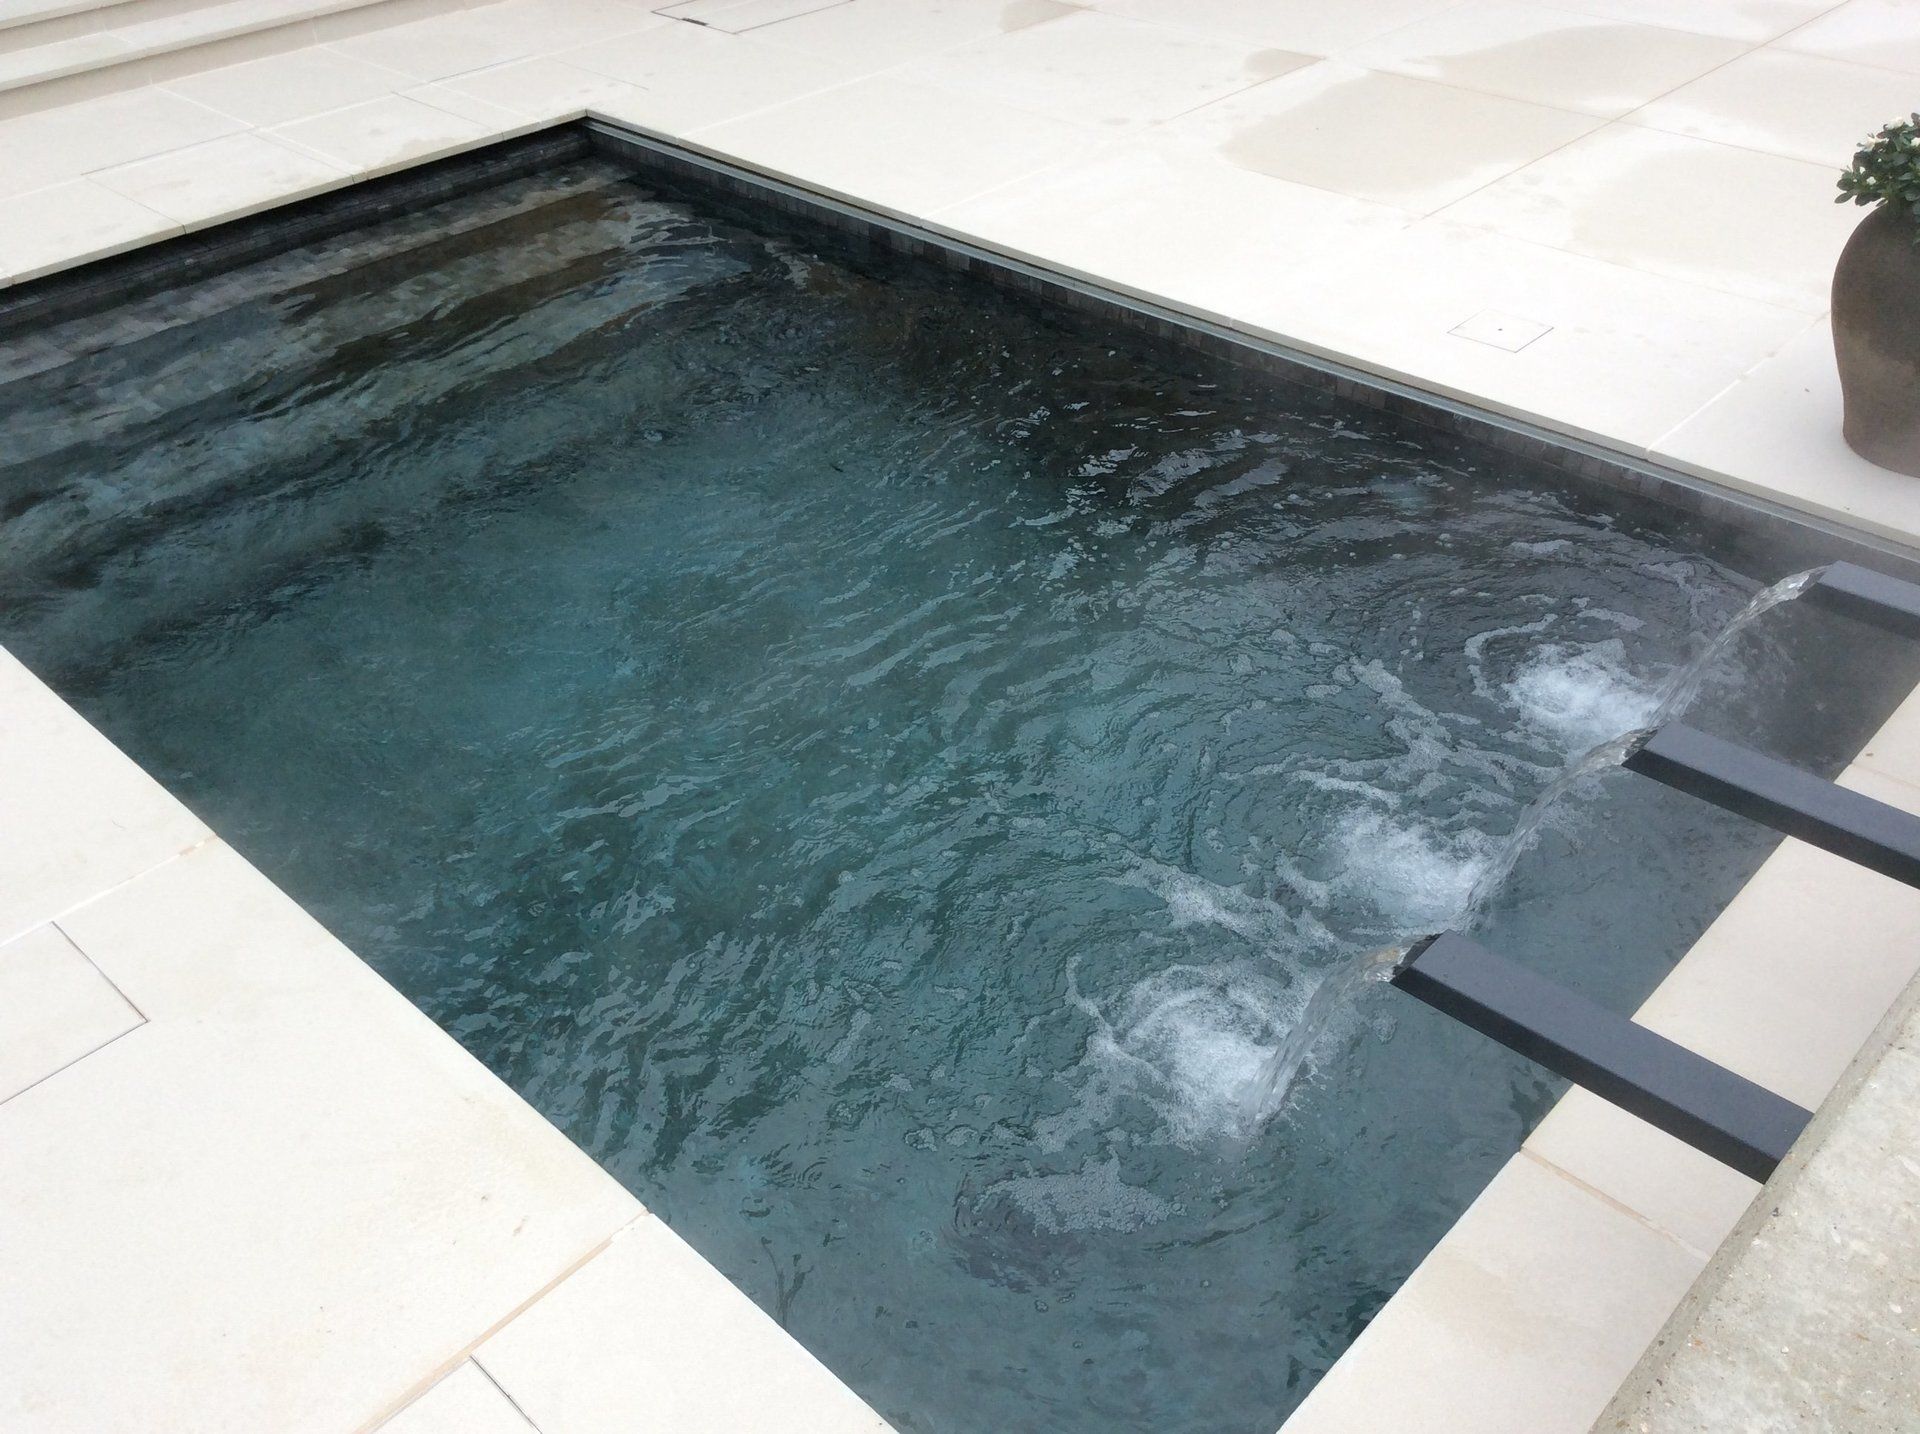 filling water in the swimming pool